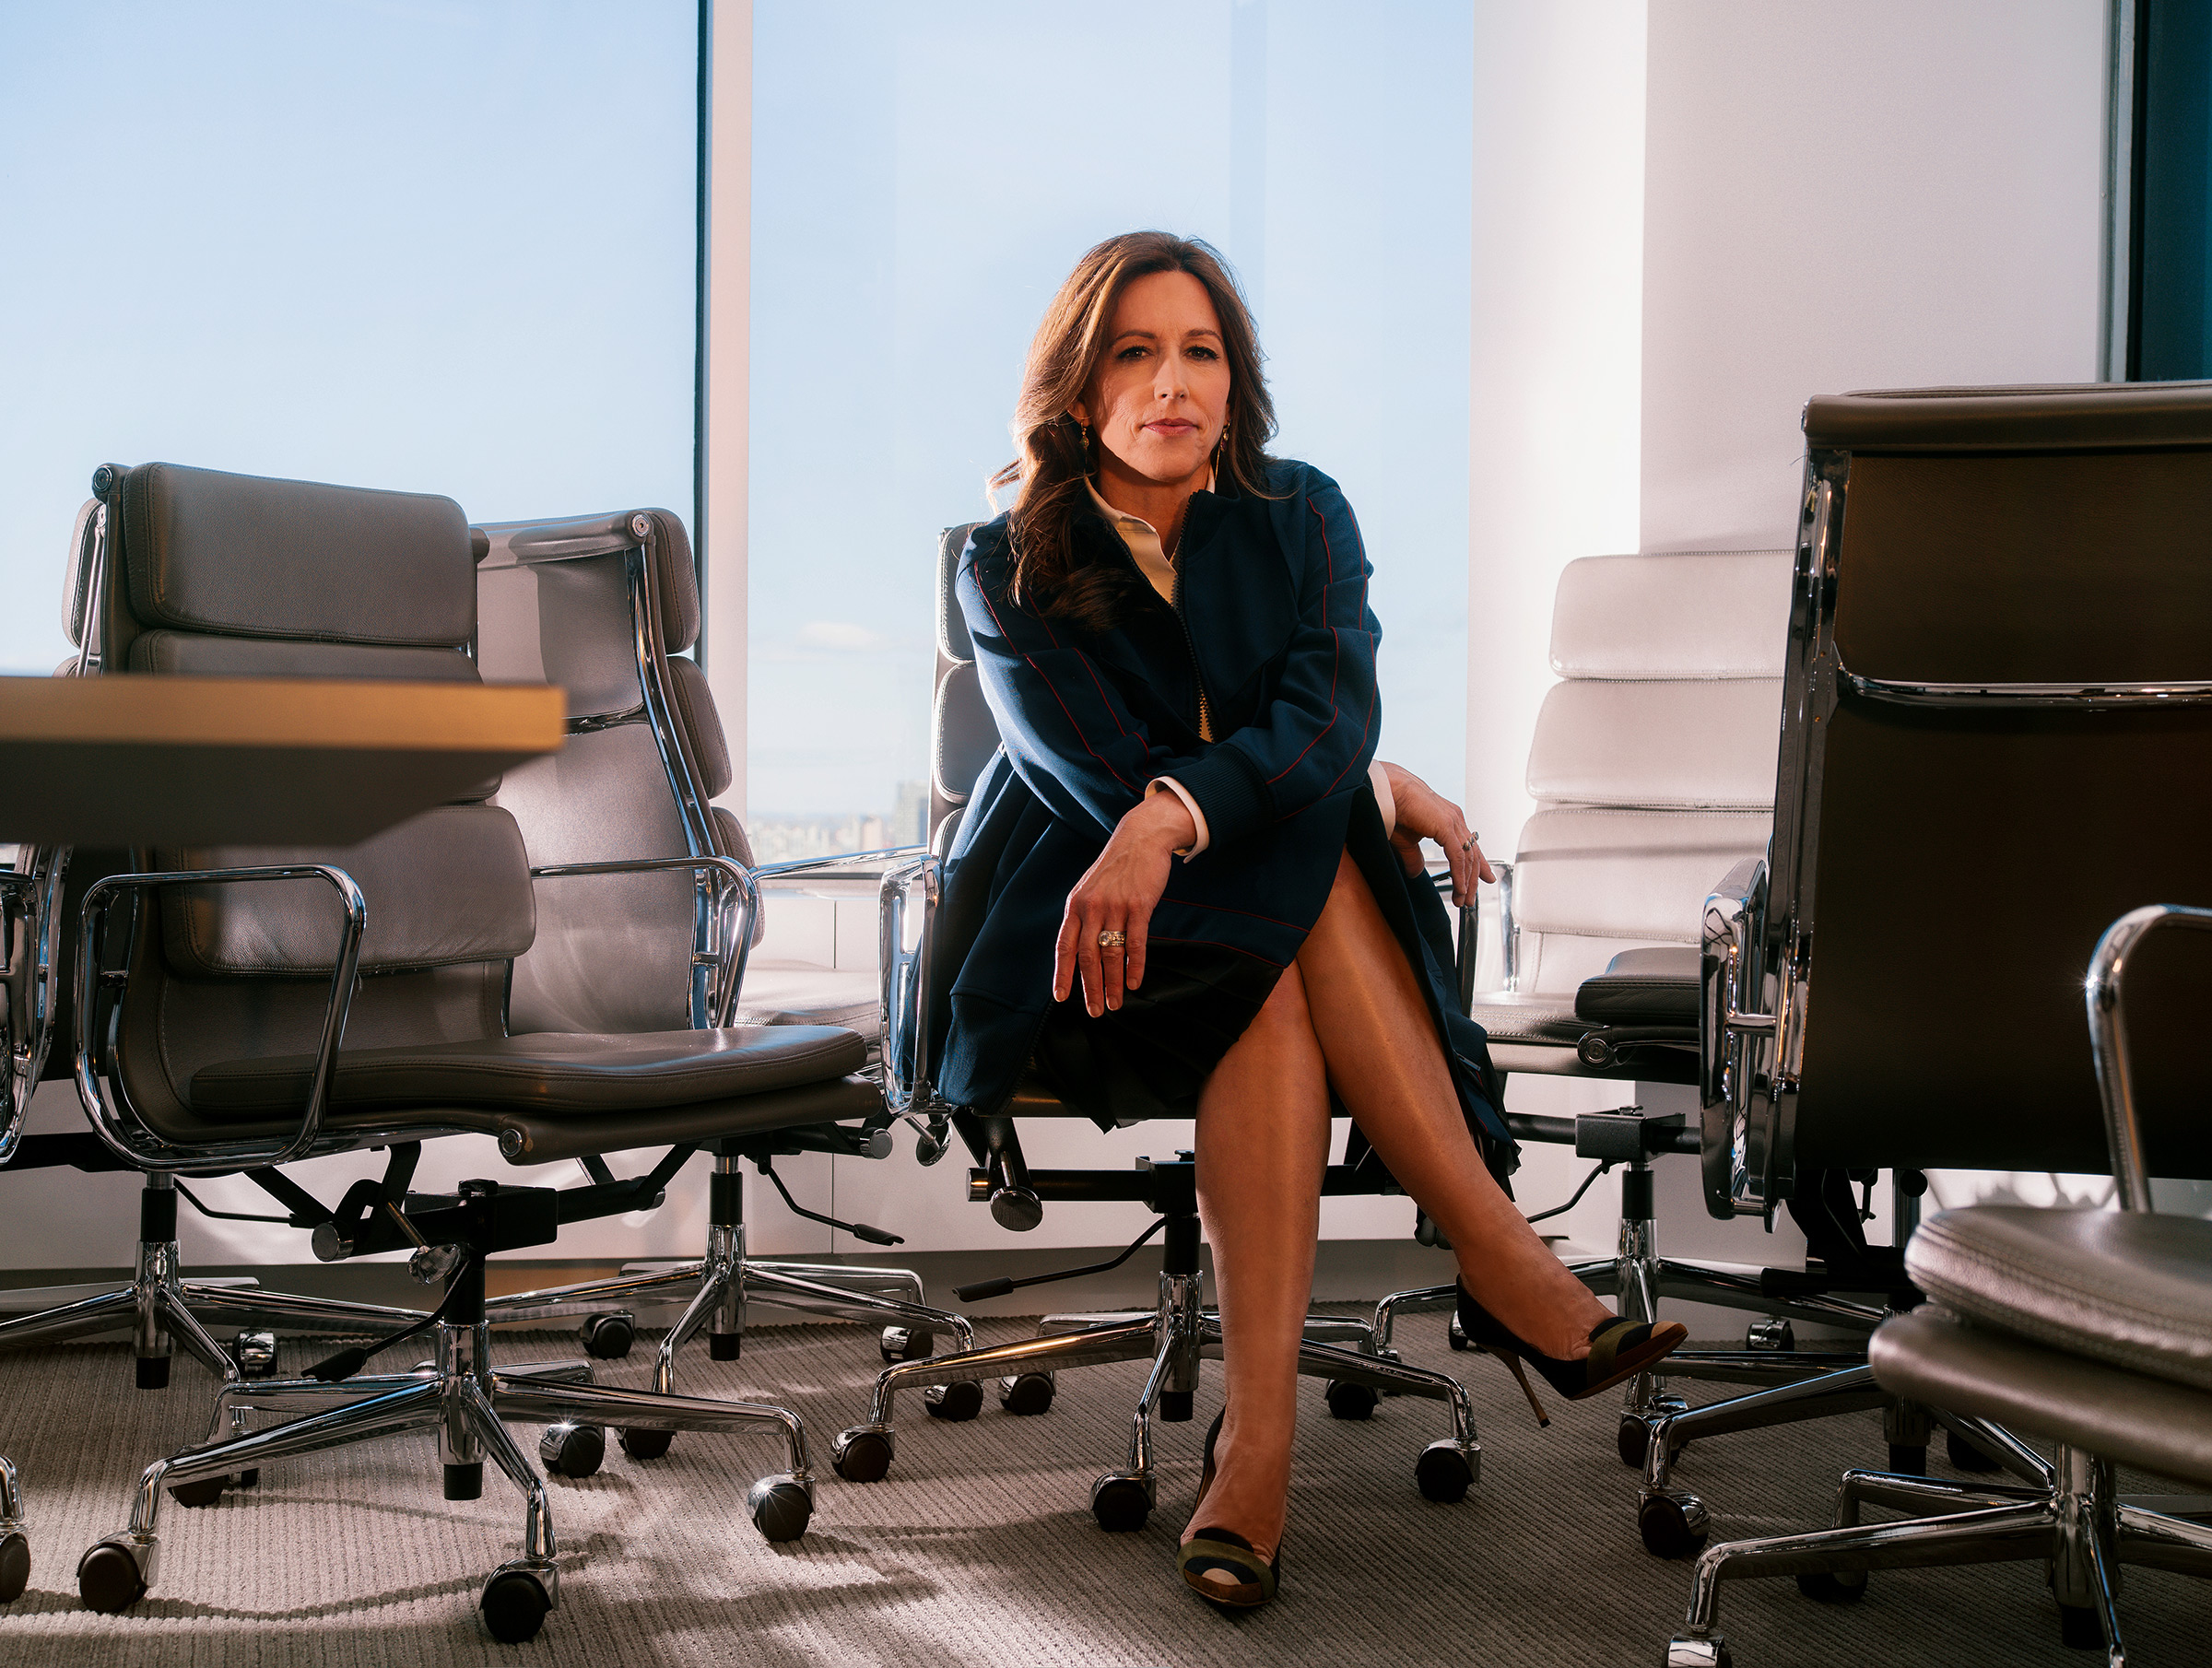 “I think it's the responsibility of CEOs to teach women the skills that they don't naturally have when they come to their firms,” says Just, at Peak6’s office in New York City. (Tonje Thilesen for TIME)